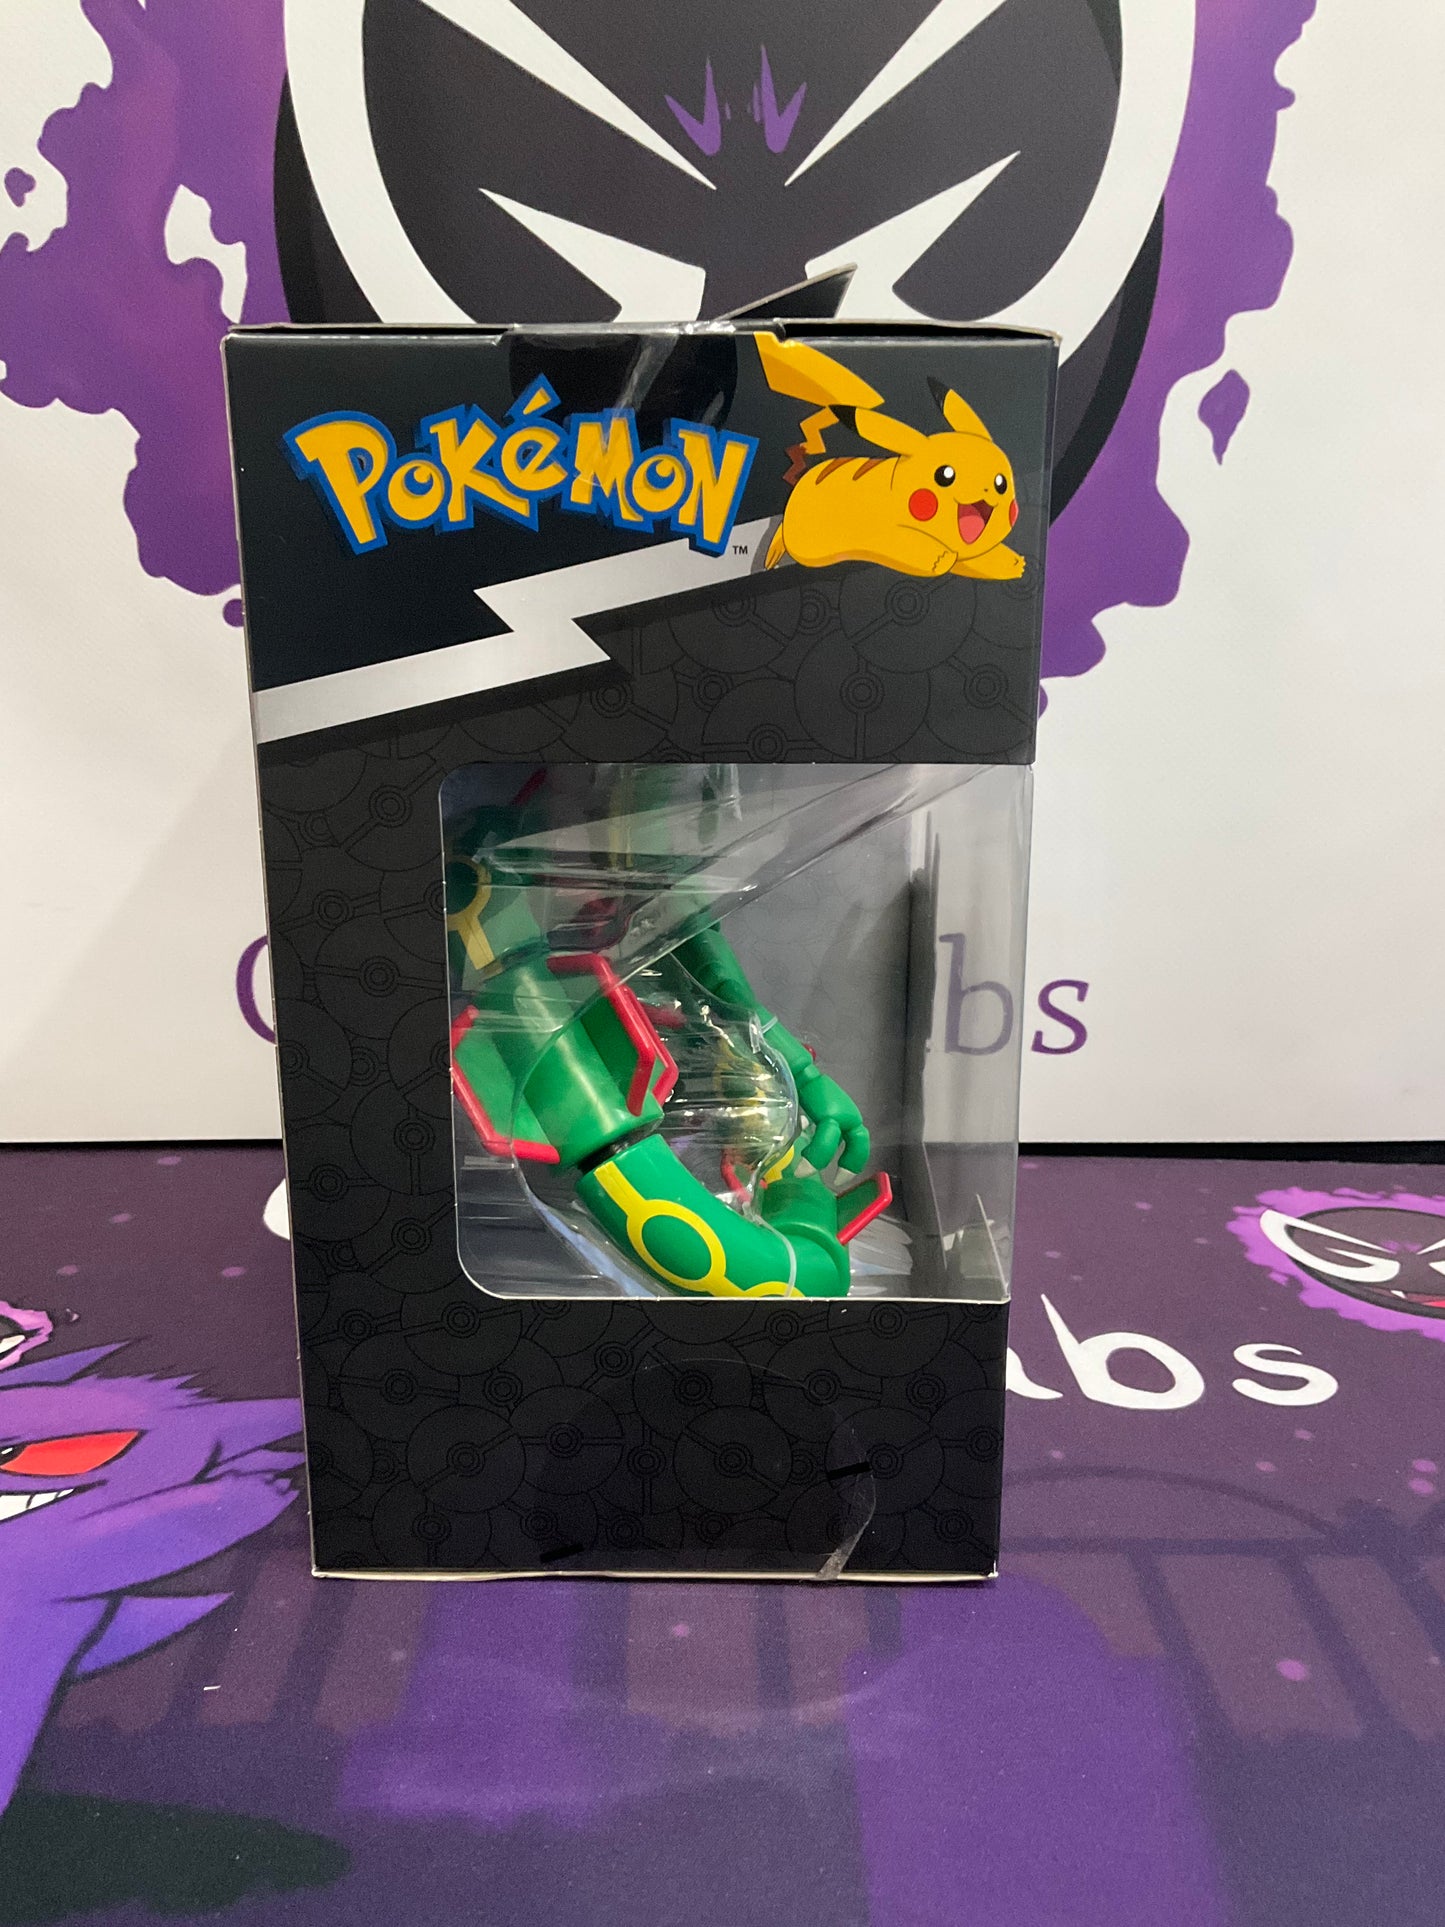 Pokémon Select Rayquaza Articulate Toy Figure.